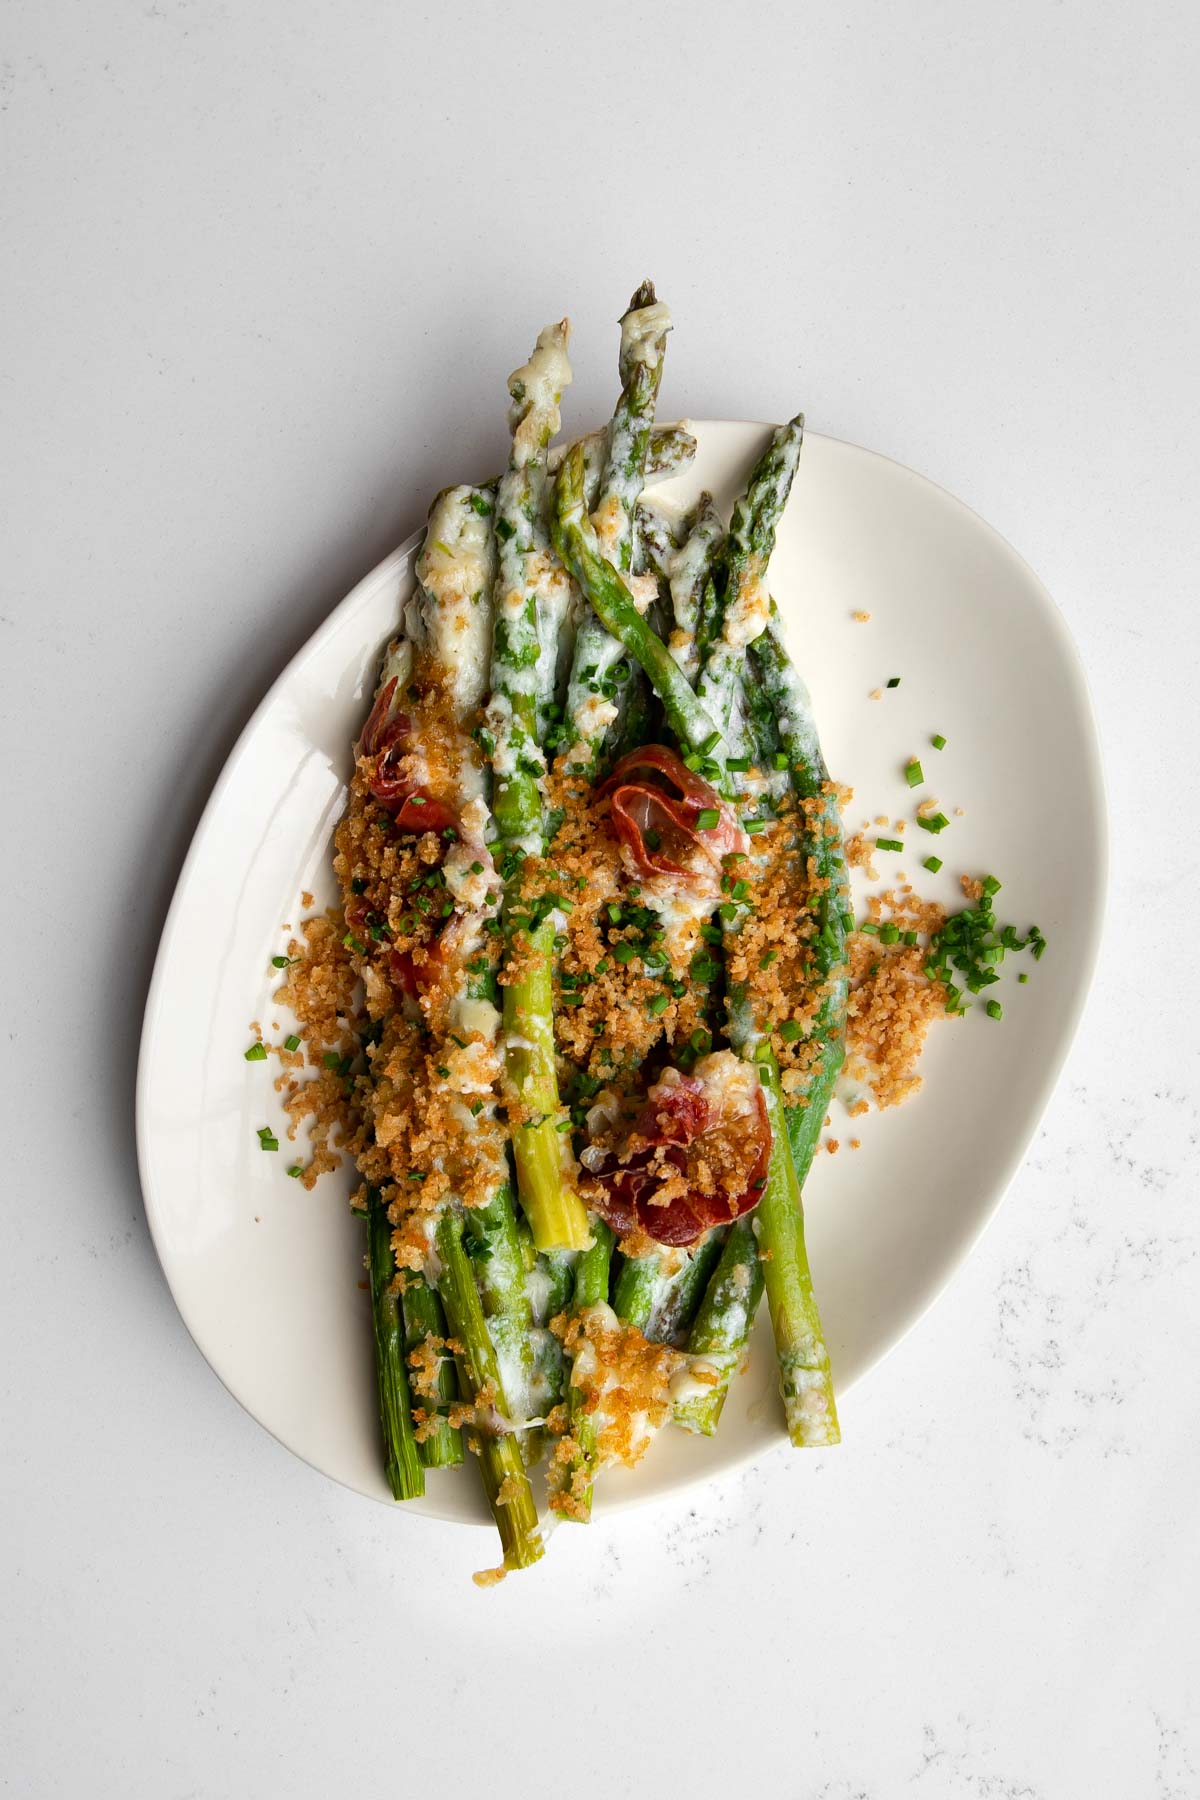 Asparagus au gratin with prosciutto served on an oval plate.